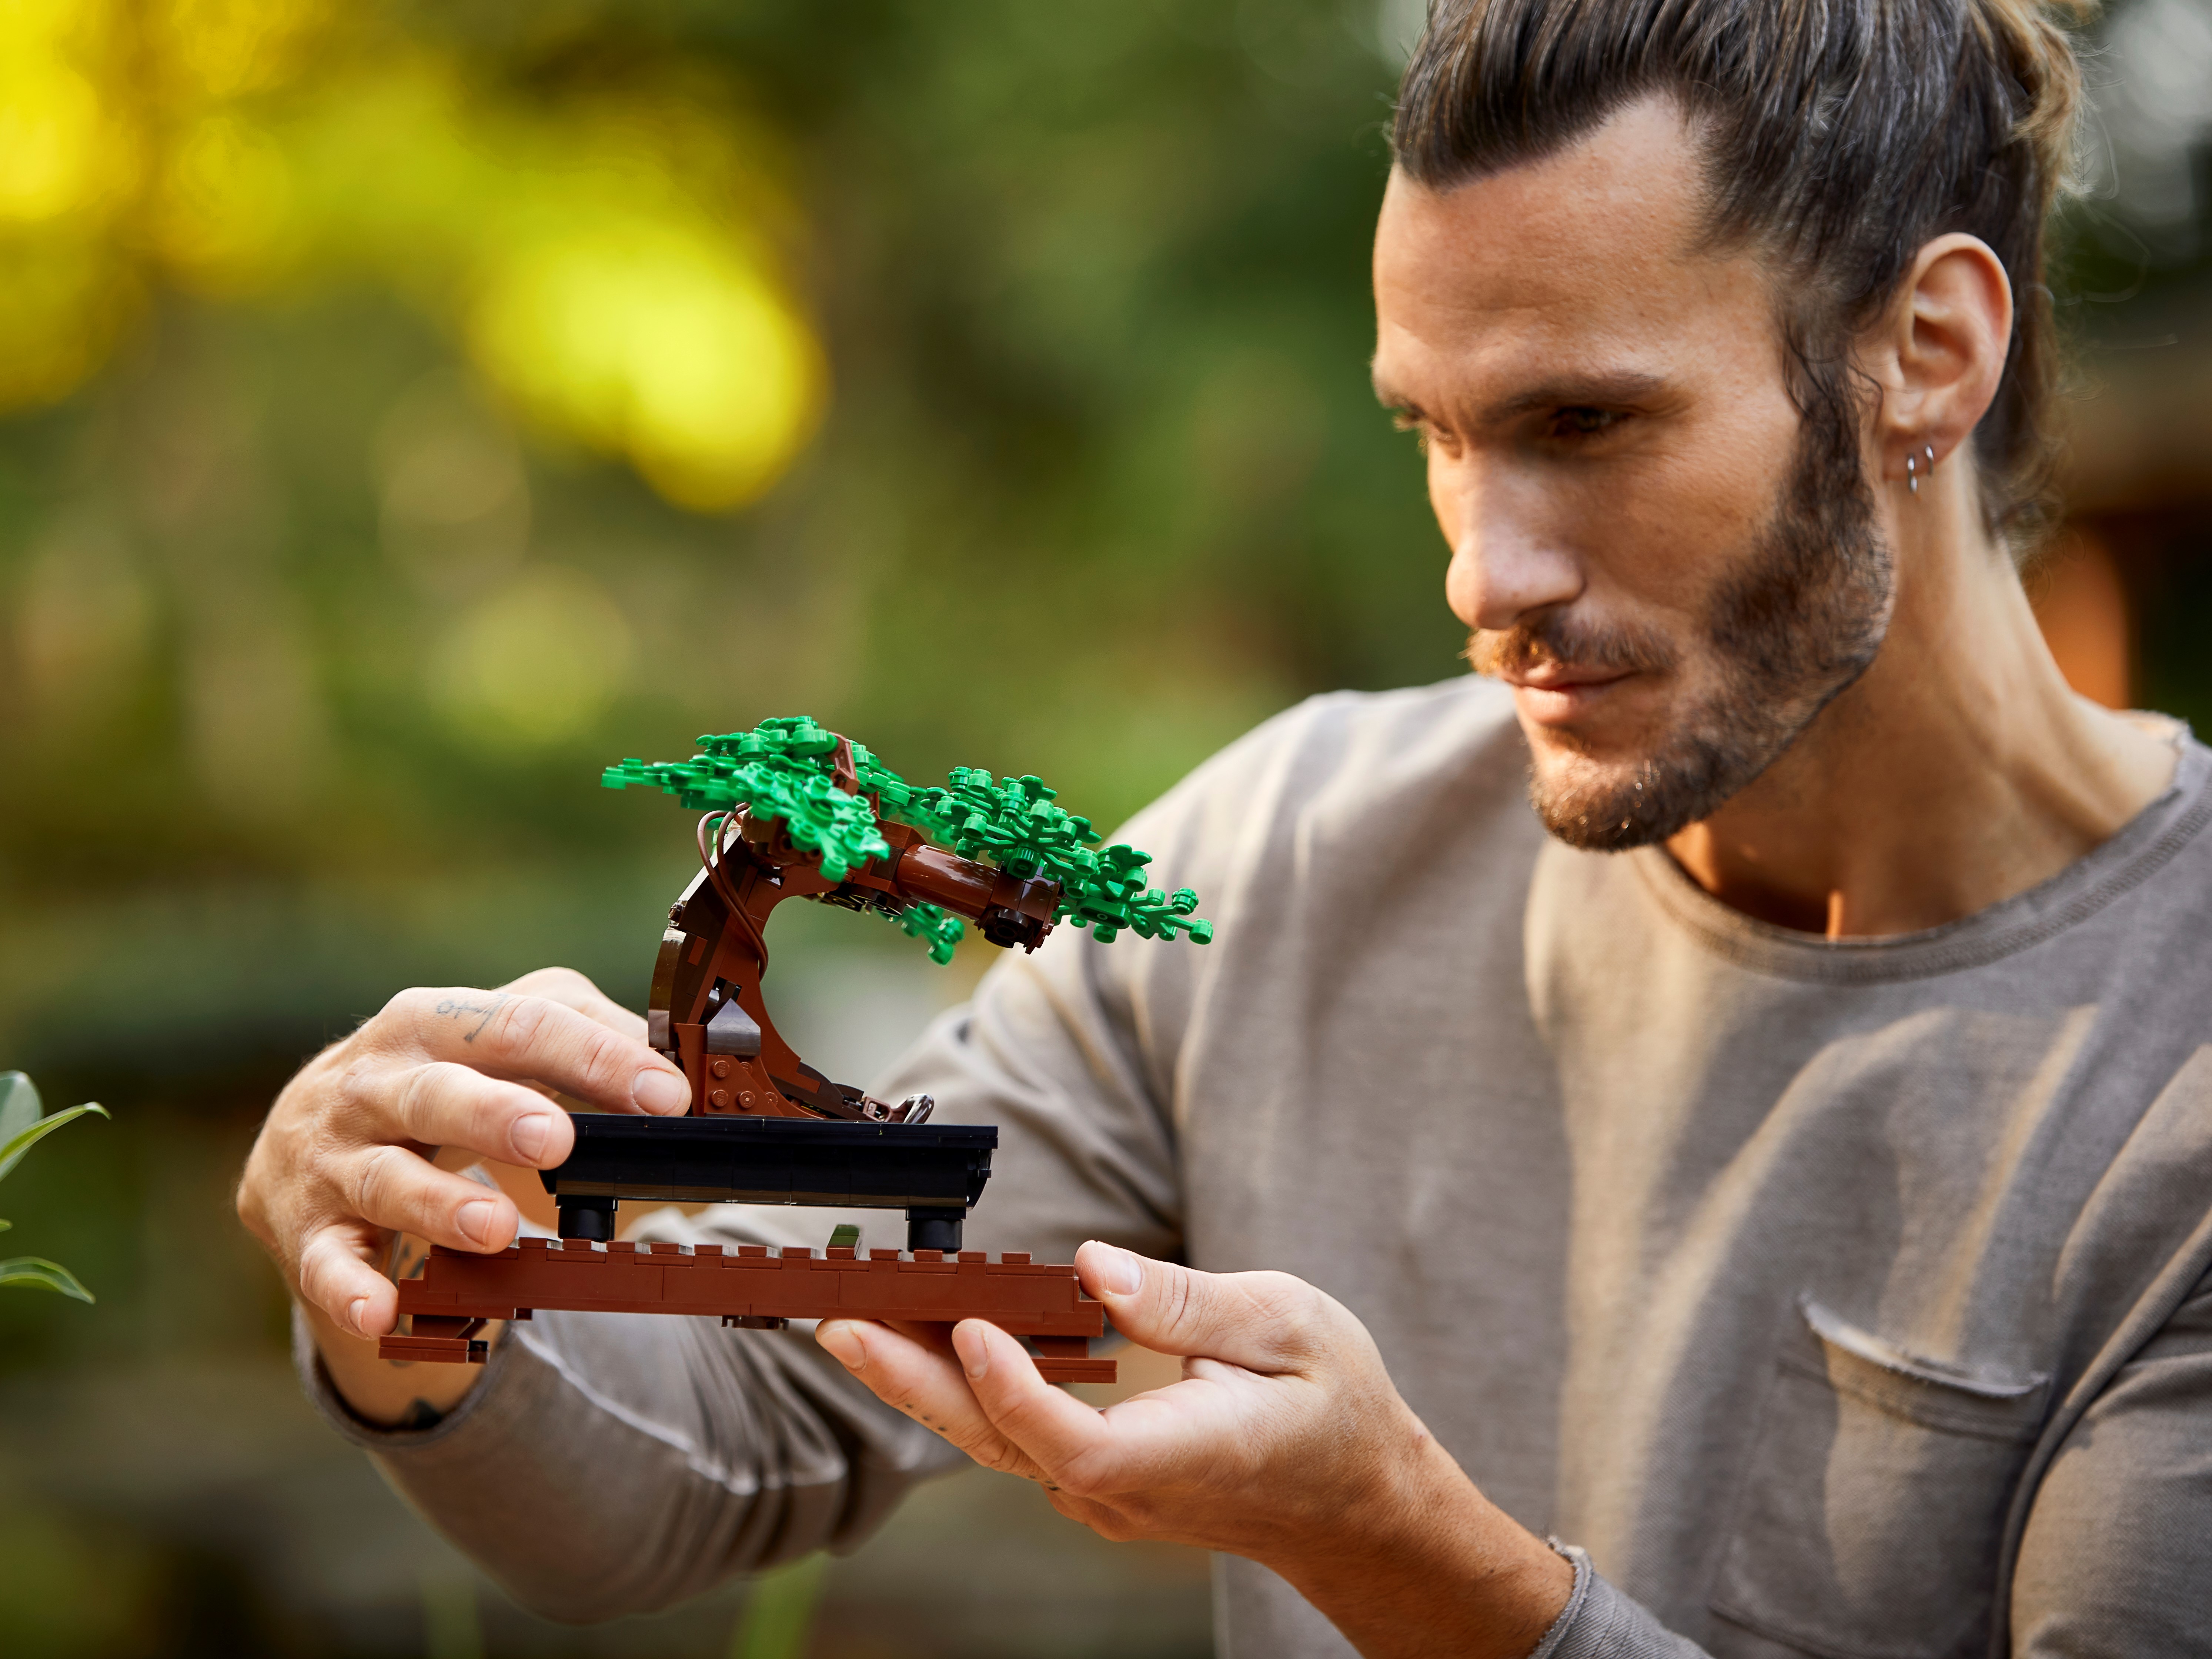 LEGO Bonsai Tree 10281 Building Kit, a Building Project to Focus